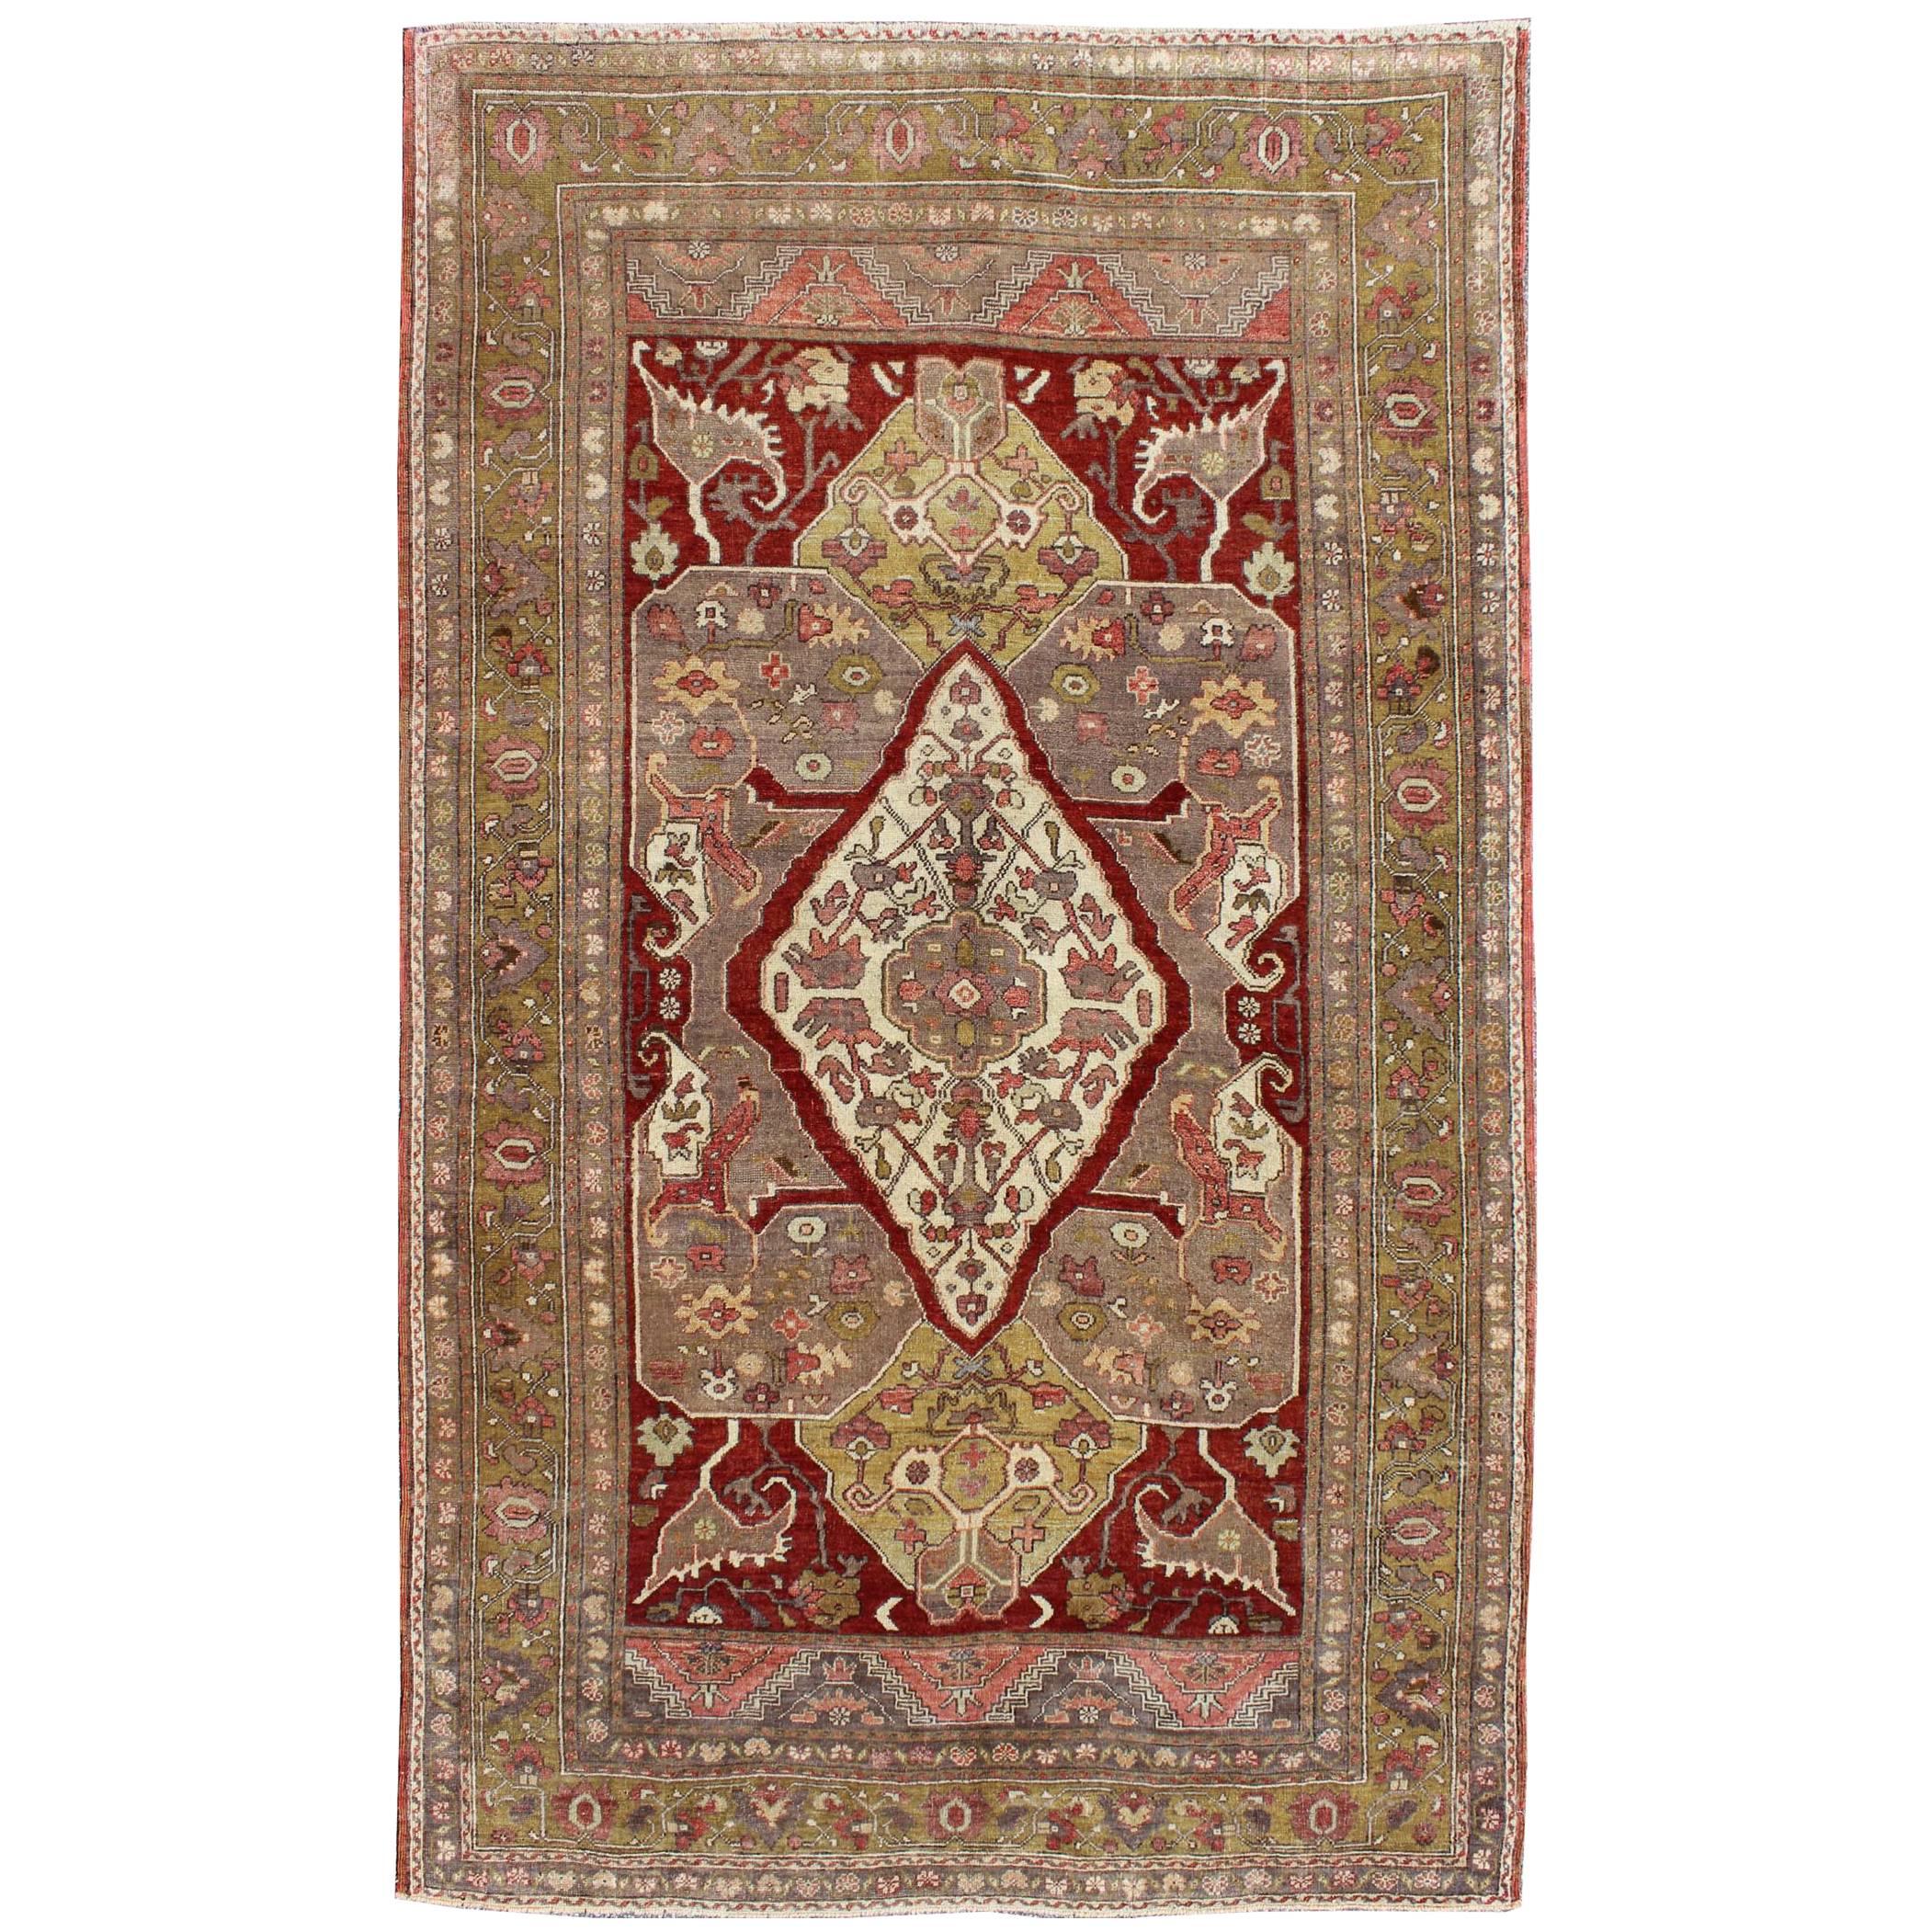 Unique Turkish Oushak Carpet with Medallion Design and Intricate Floral Motifs